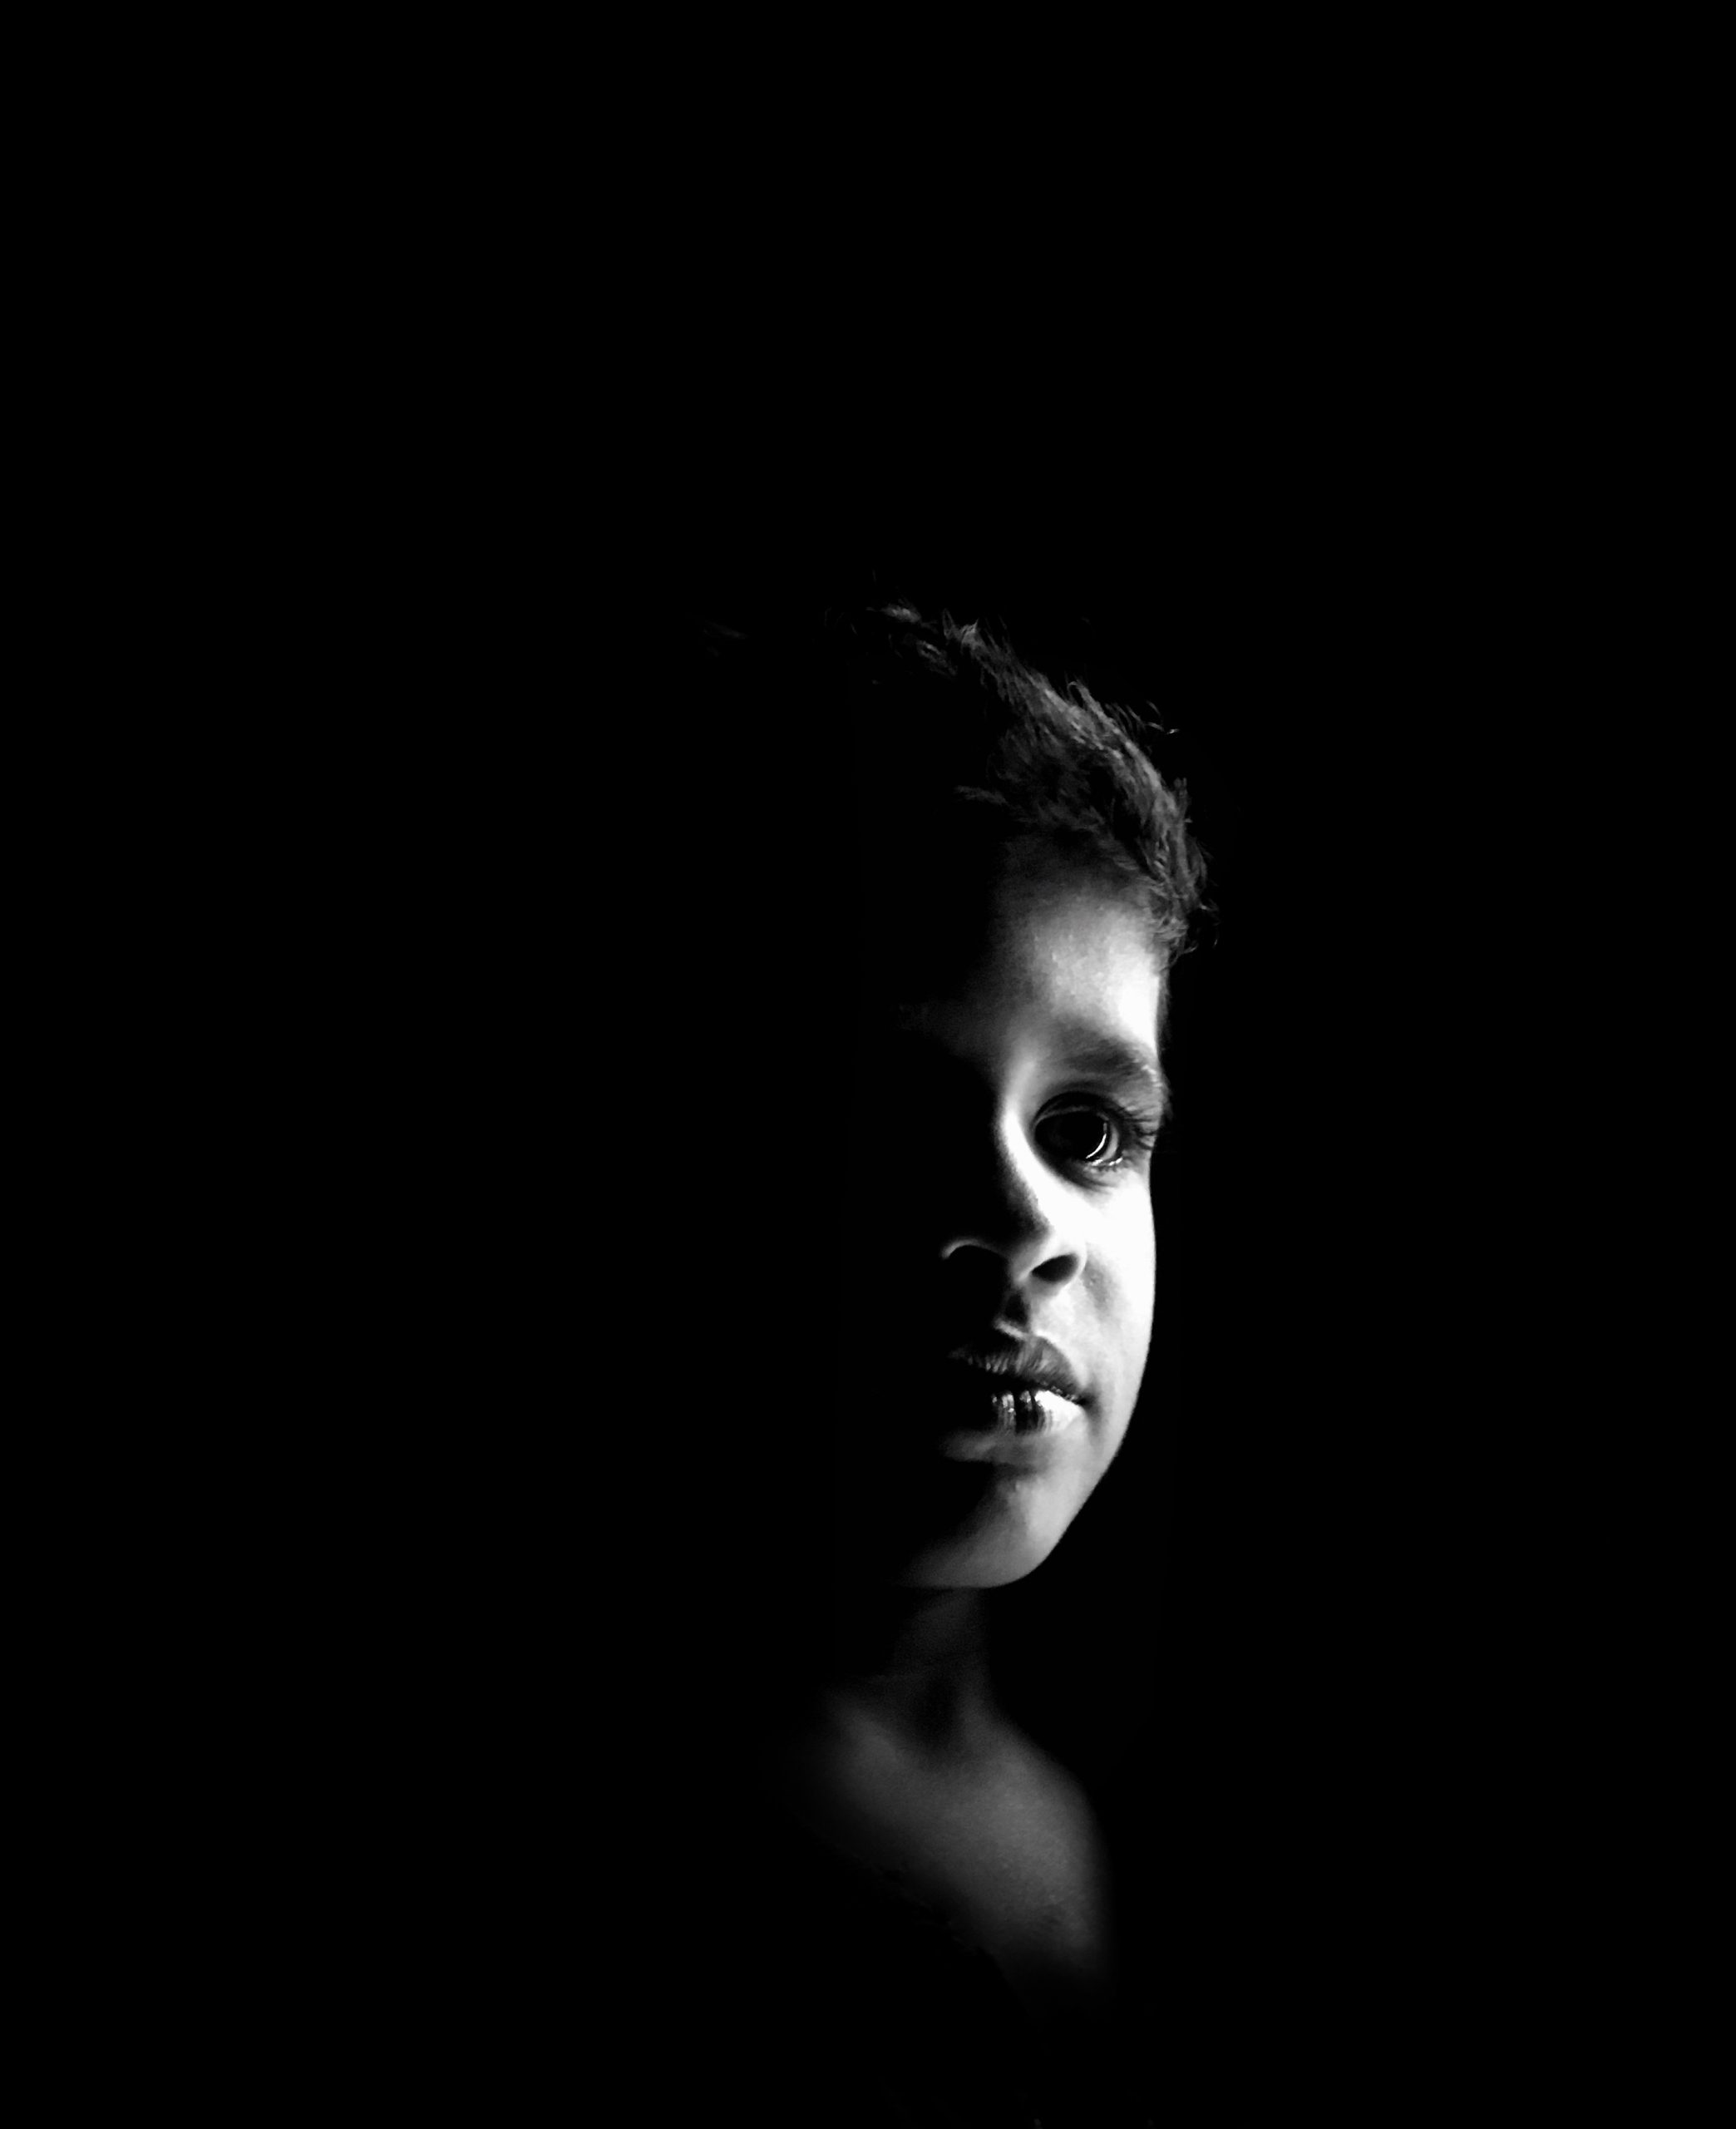 Black and white portrait of a kid